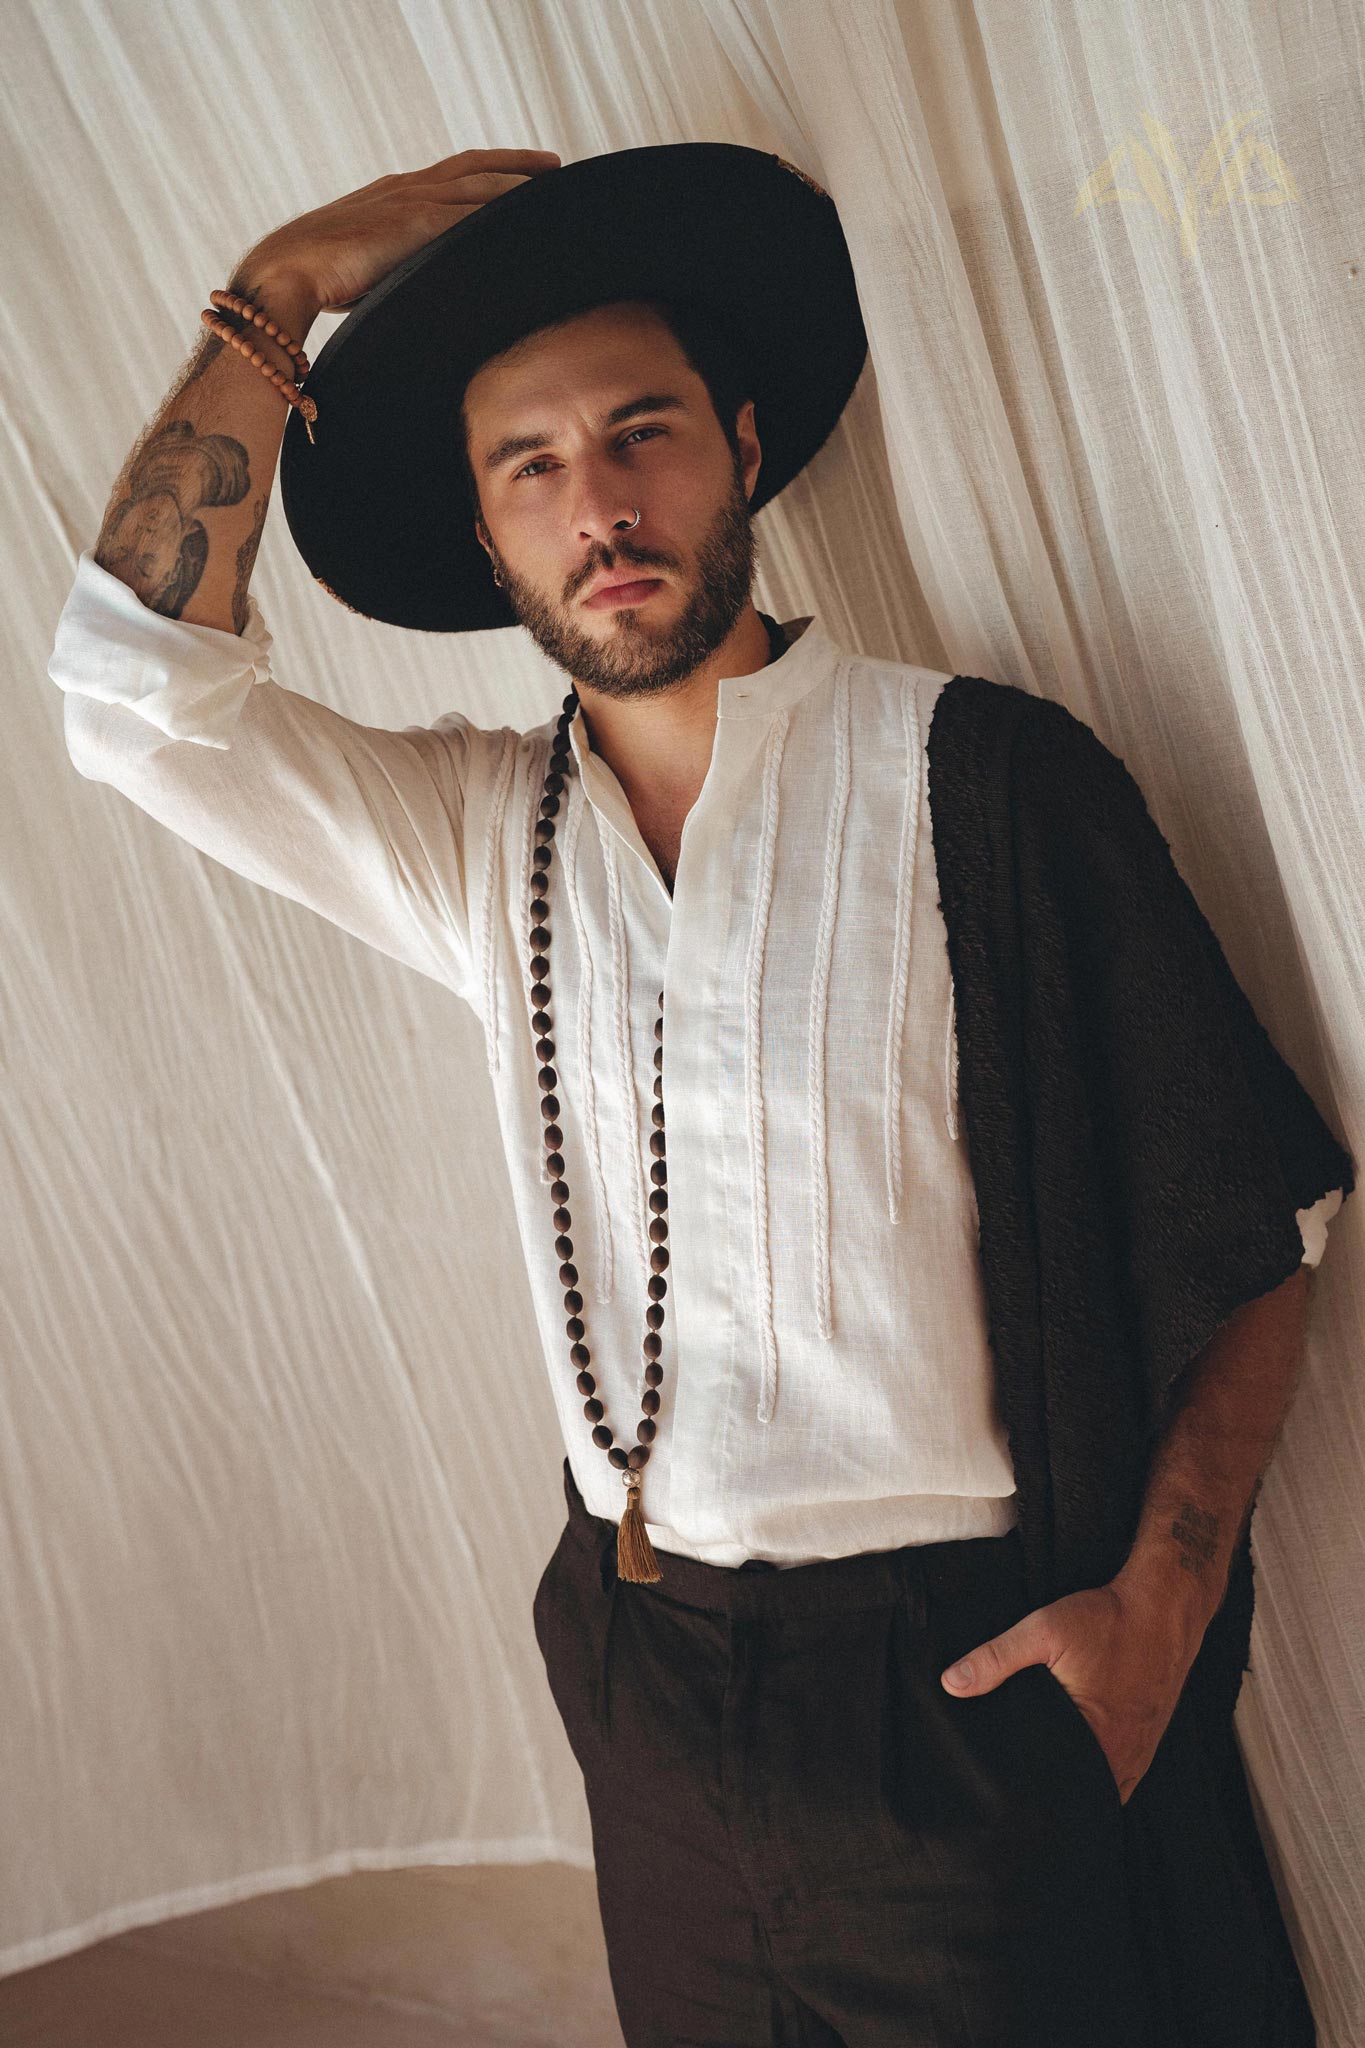 Off-White Linen Shirt for Men with Handmade Braids by AYA Sacred Wear